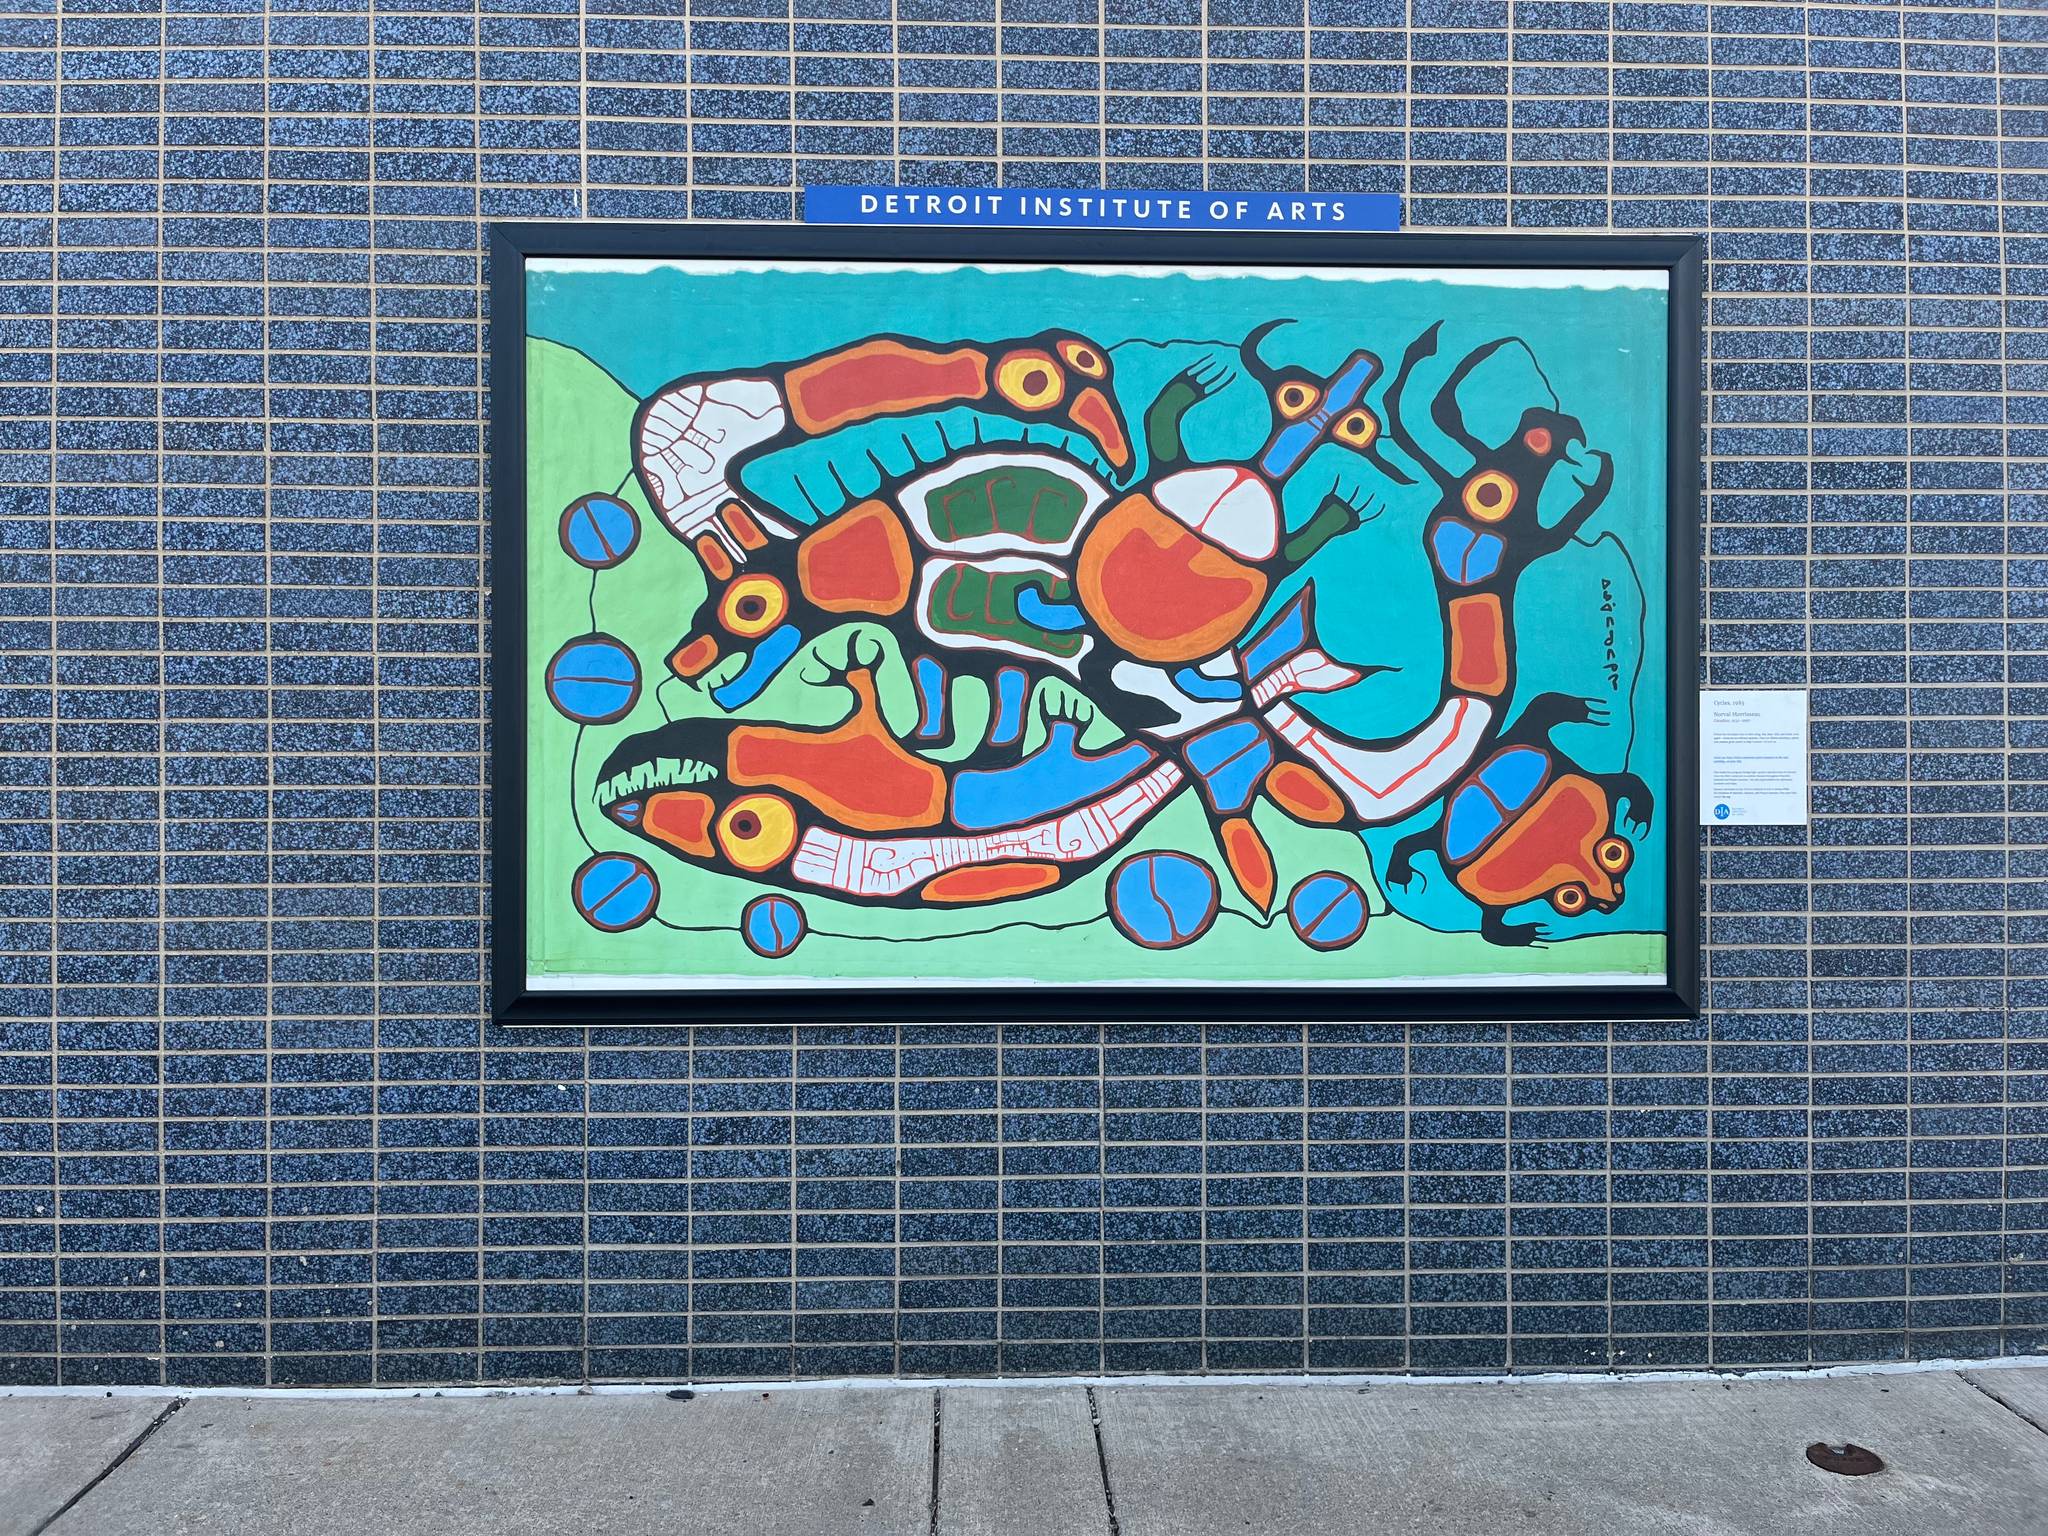 &mdash;Norval Morrisseau, Cycles